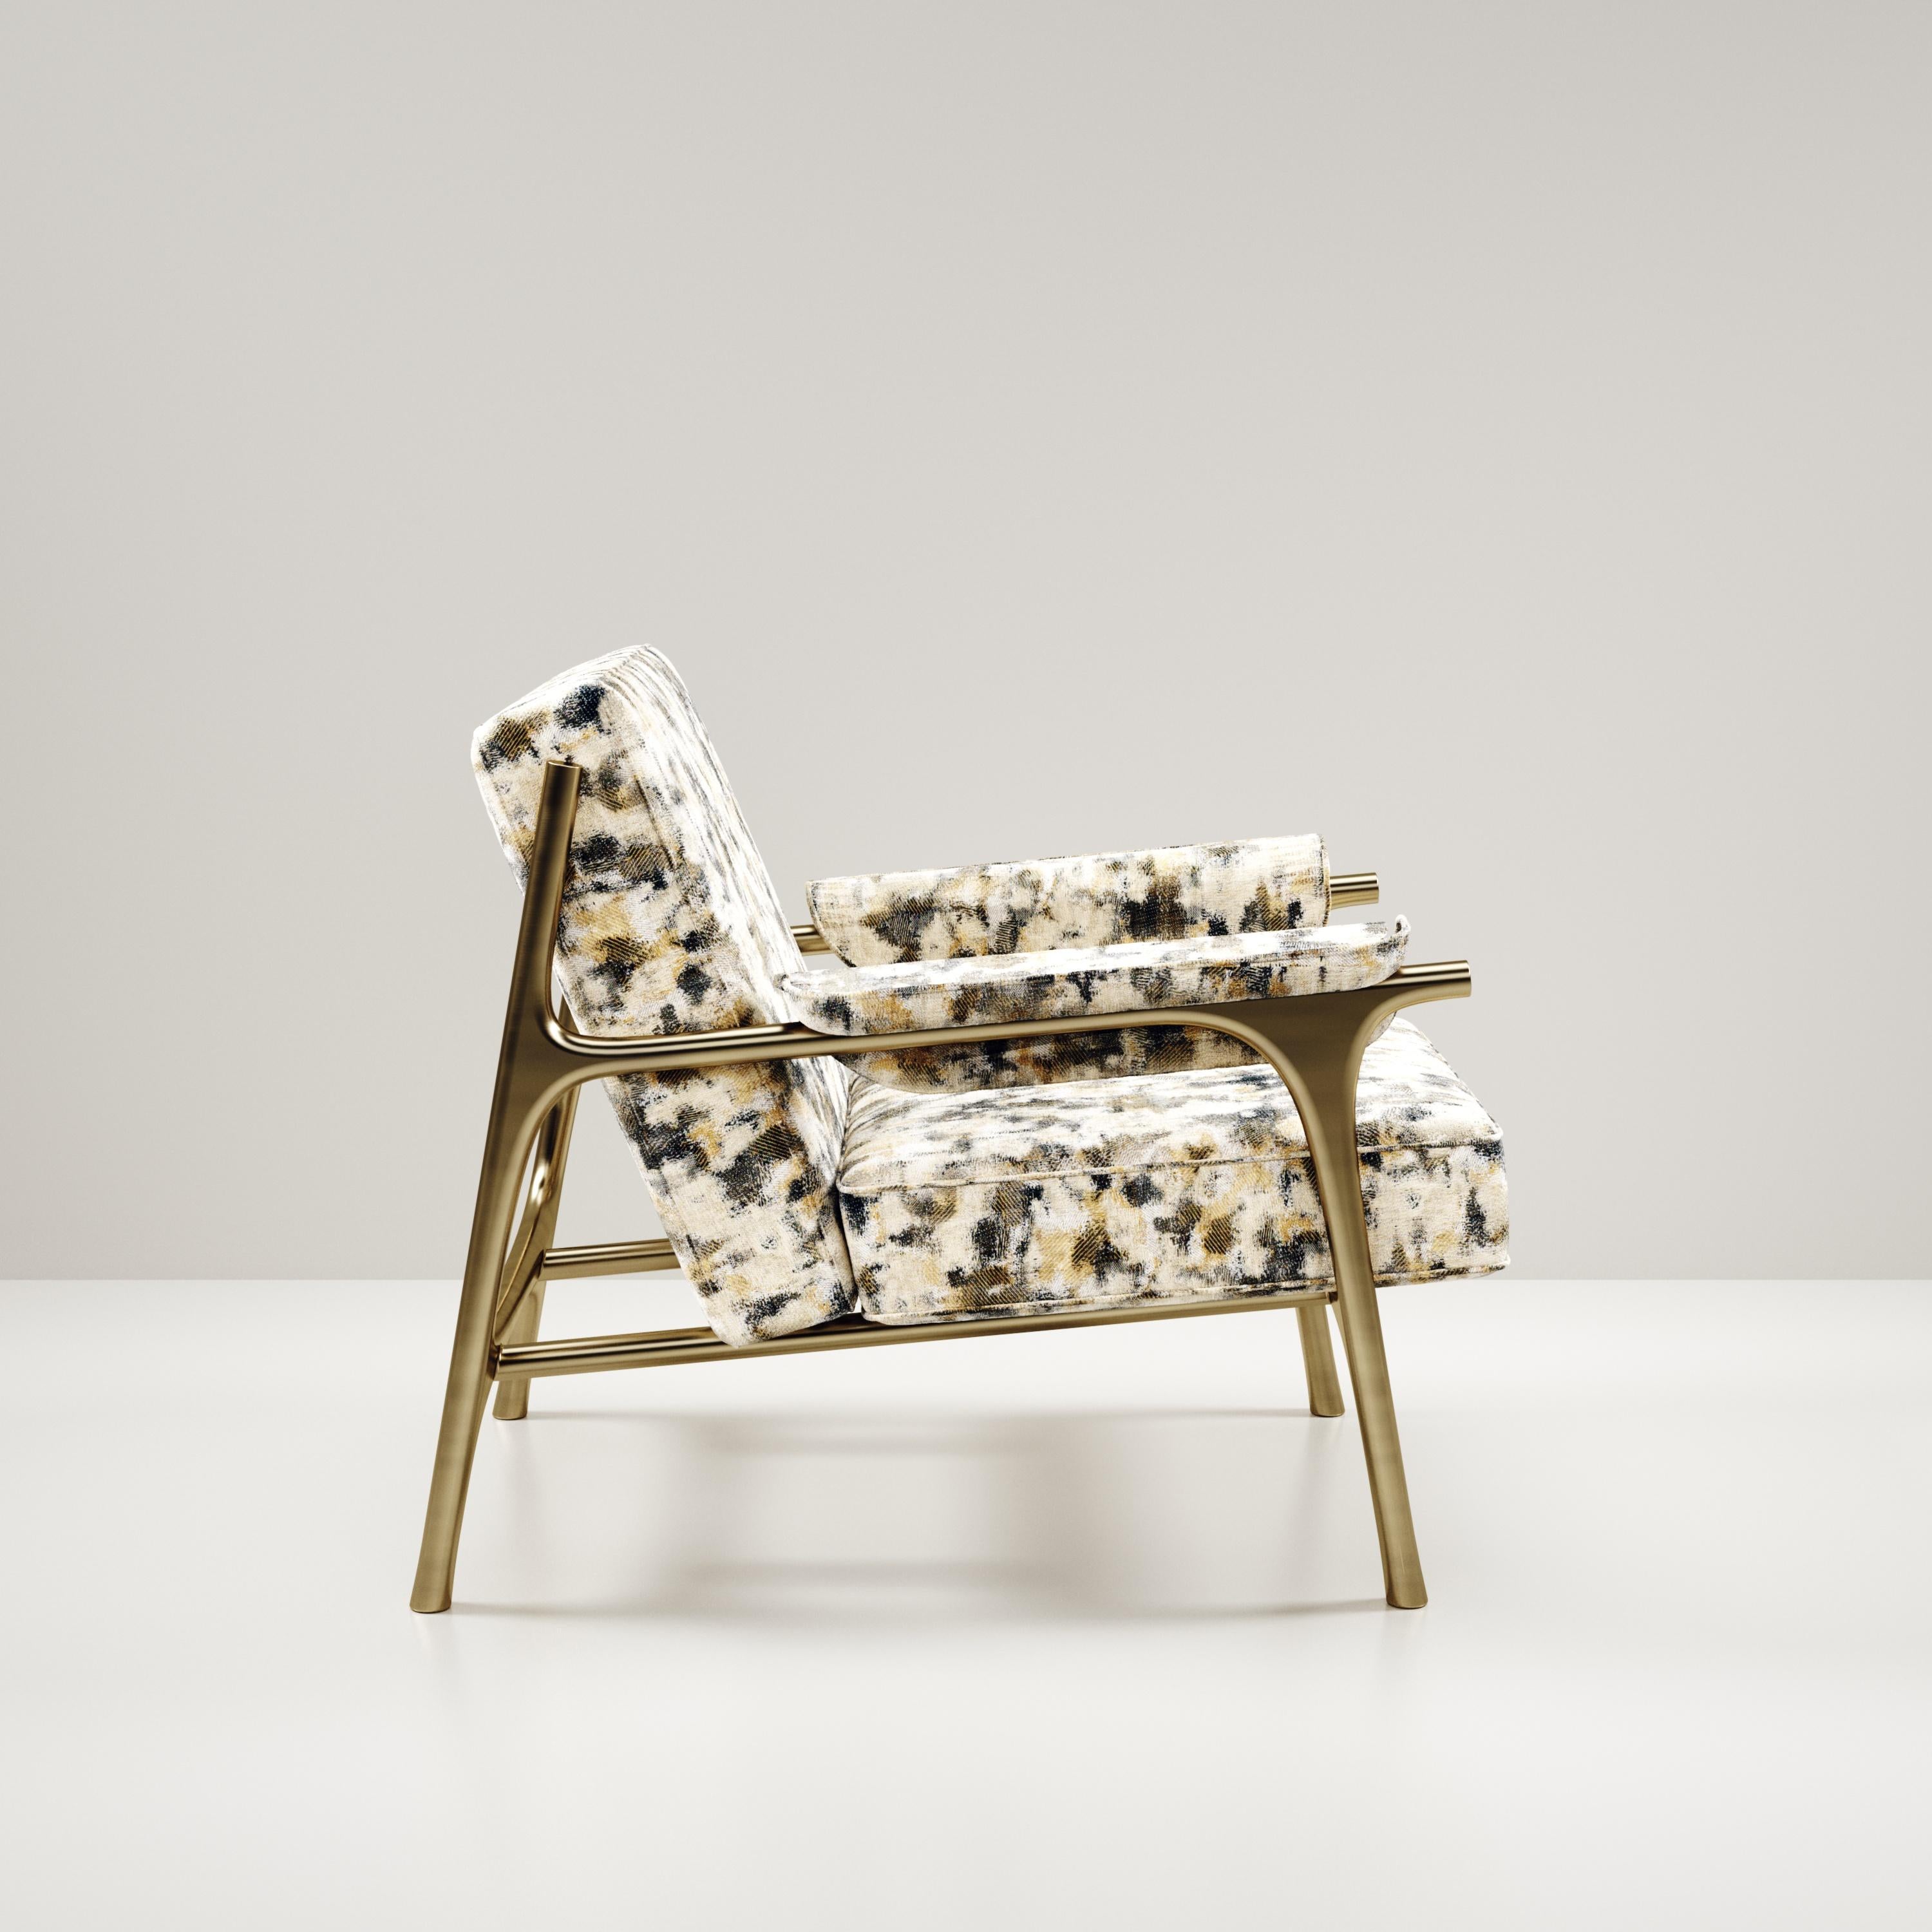 The Ramo Armchair by R & Y Augousti is an elegant and versatile piece. The upholstered piece in camouflage Pierre Frey fabric provides comfort while retaining a unique aesthetic with the bronze-patina brass frame and details. This listing is priced